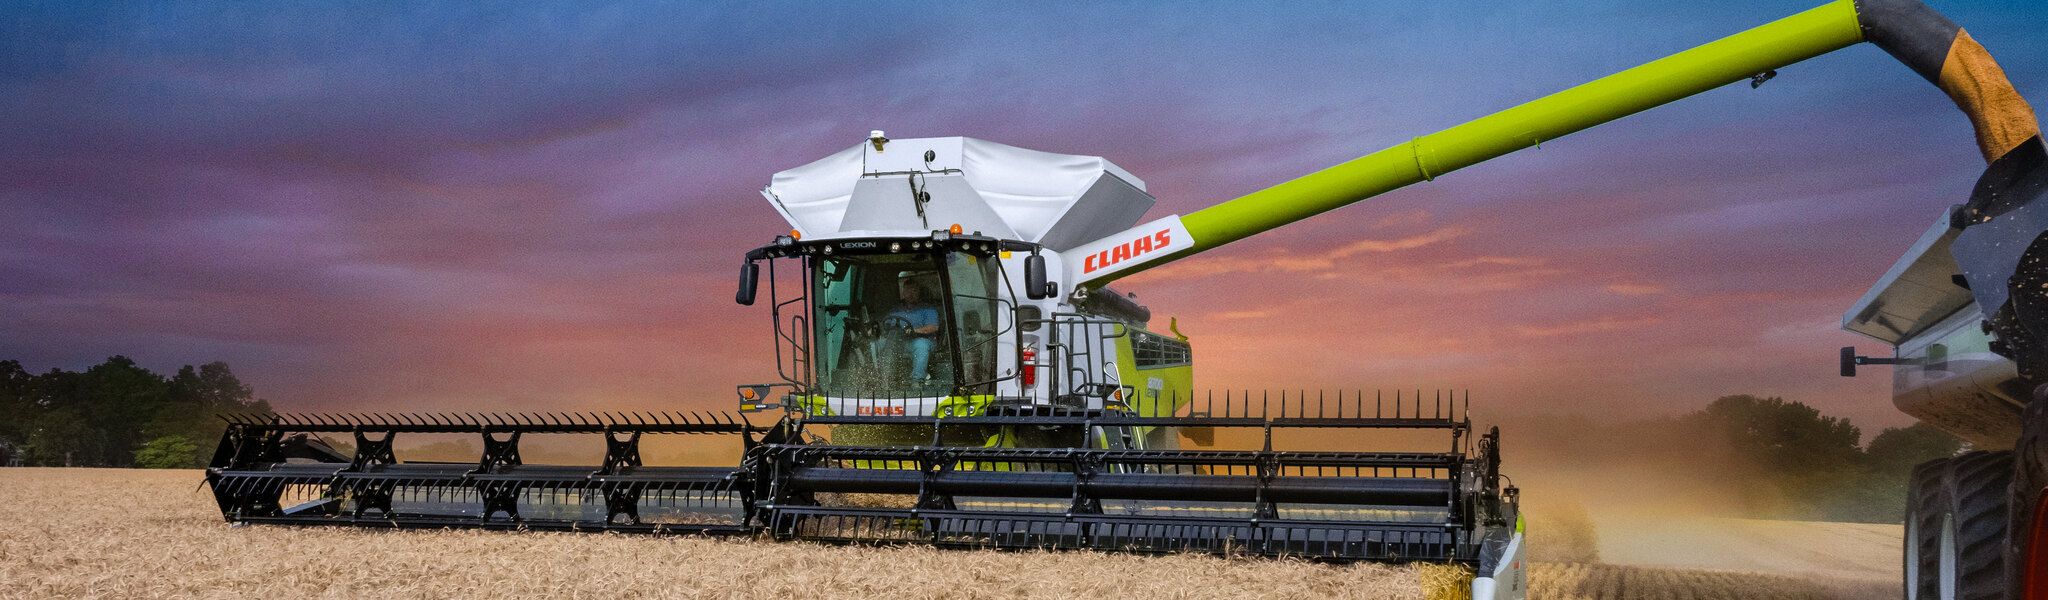 Claas-lexion-8700-sunset-front-unload.jpg